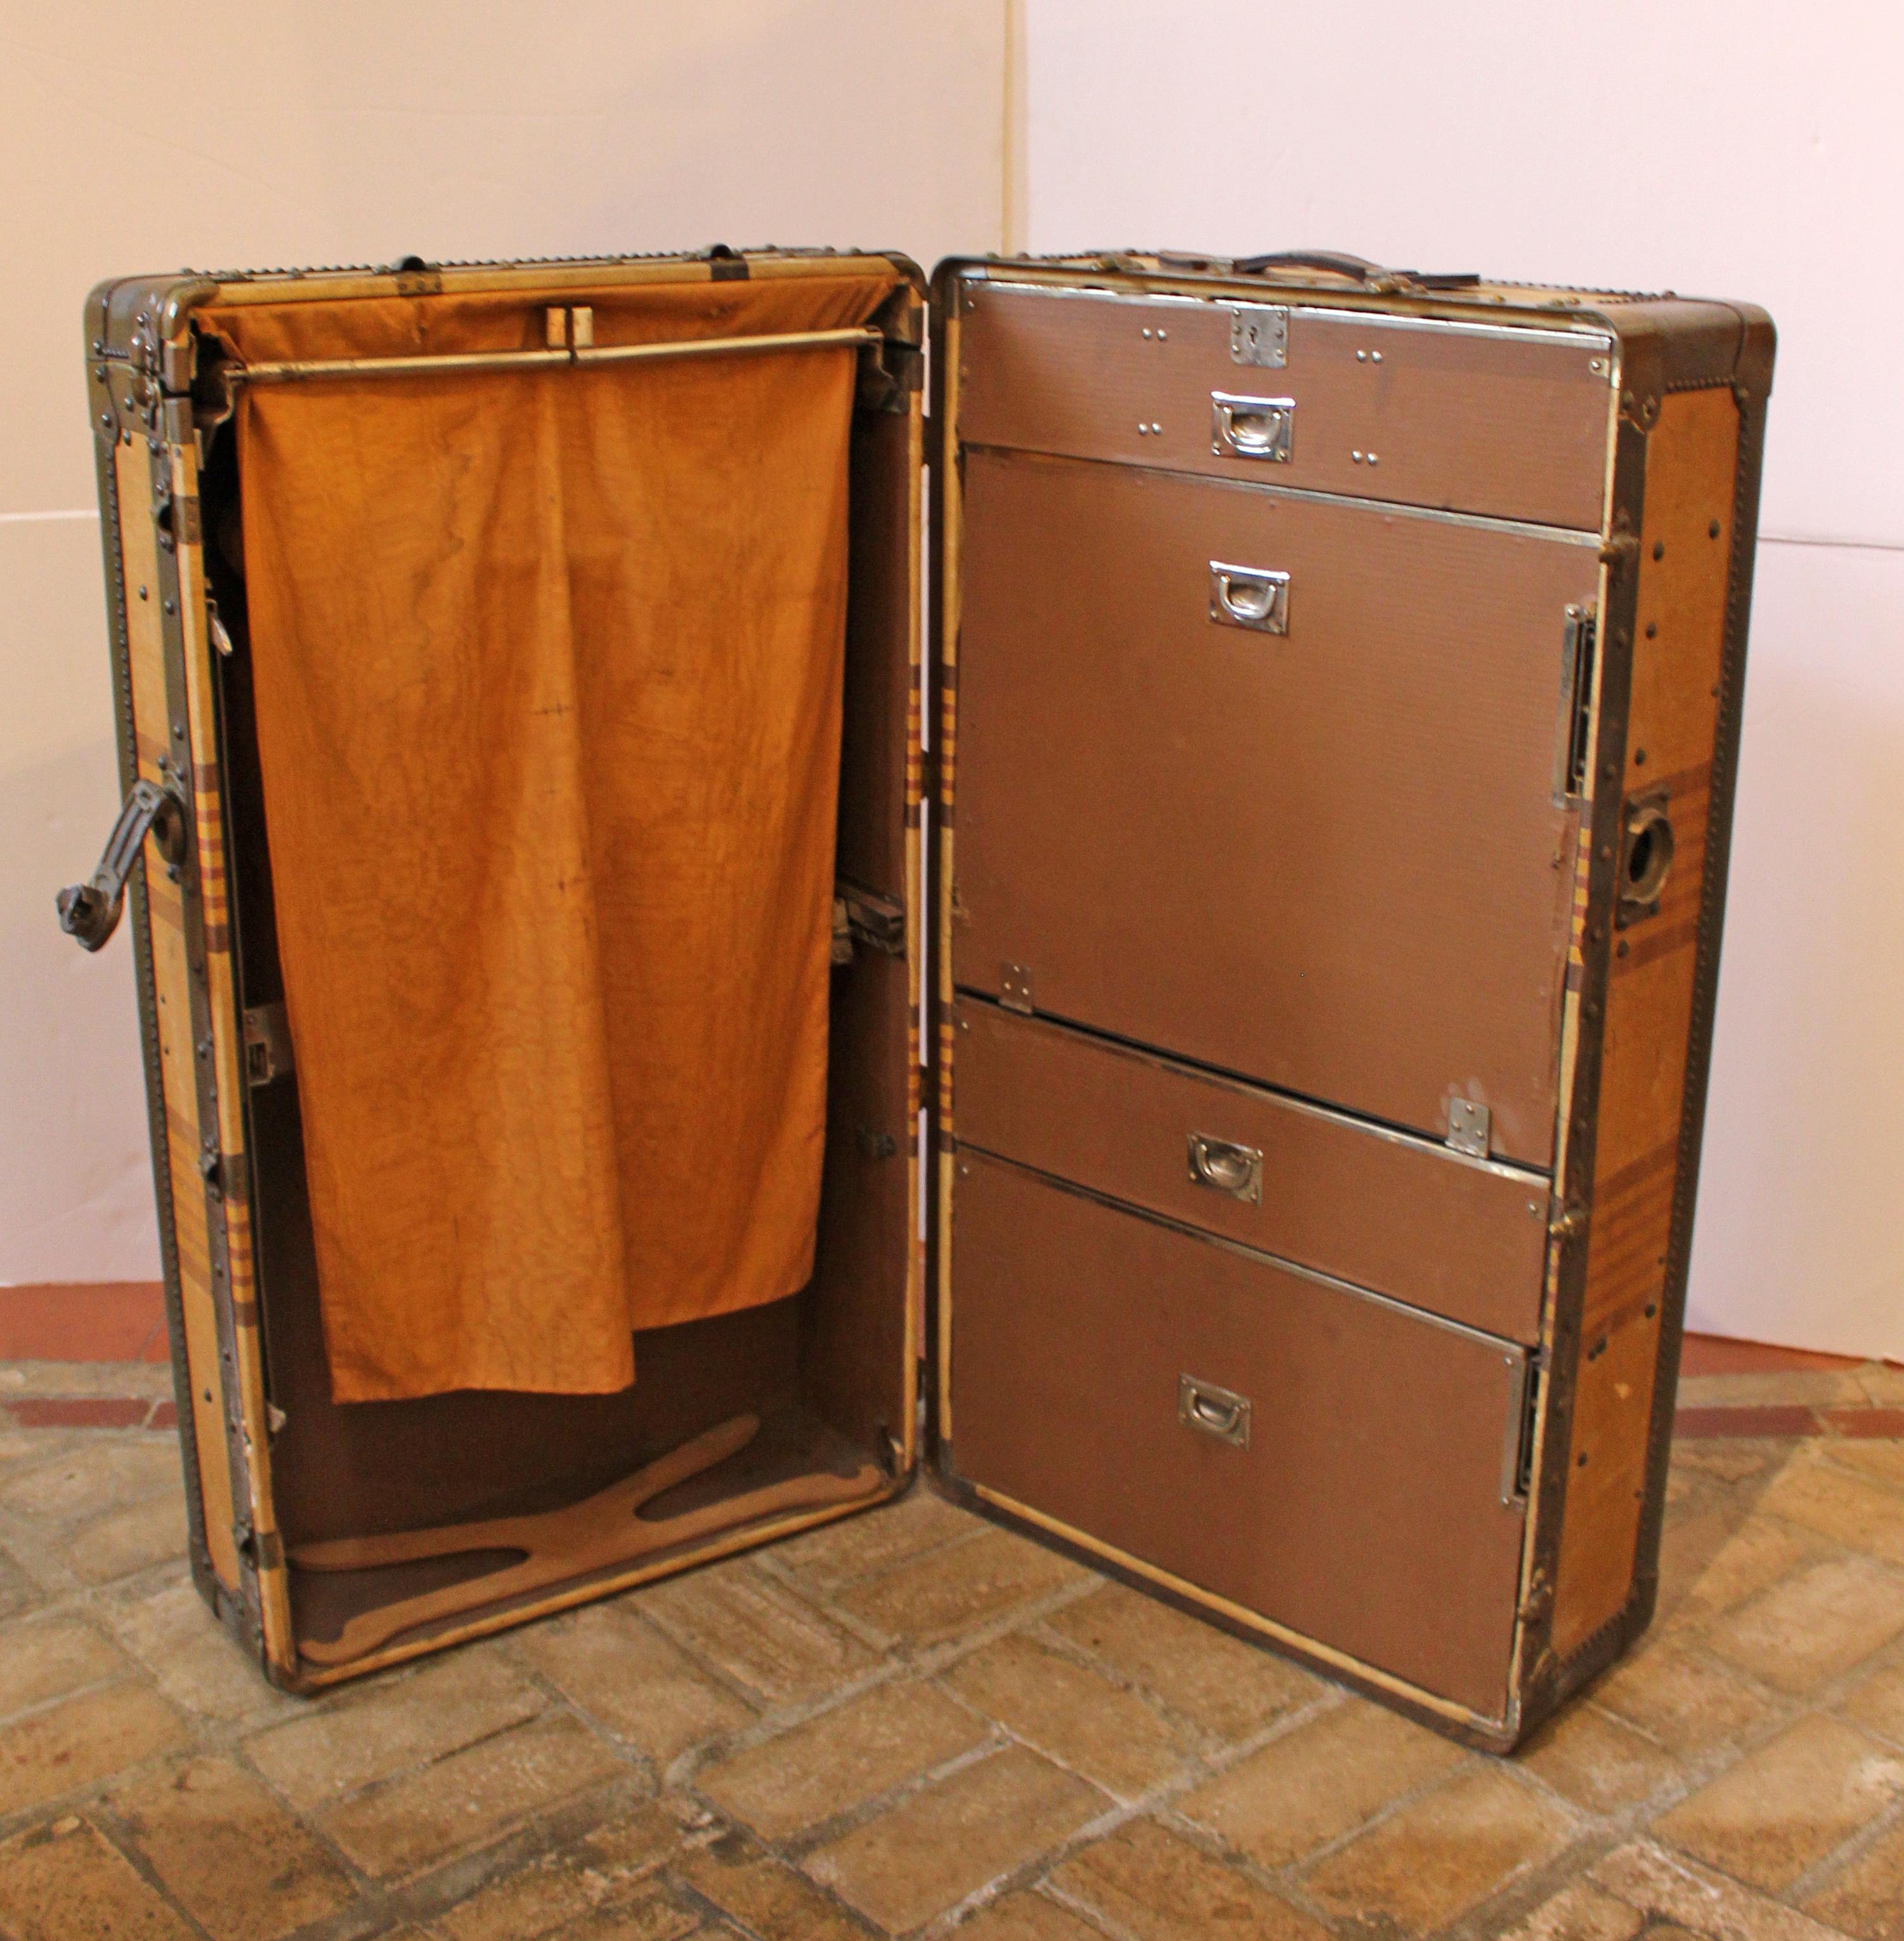 Metal 19th Century French Wardrobe Luggage Trunk For Sale